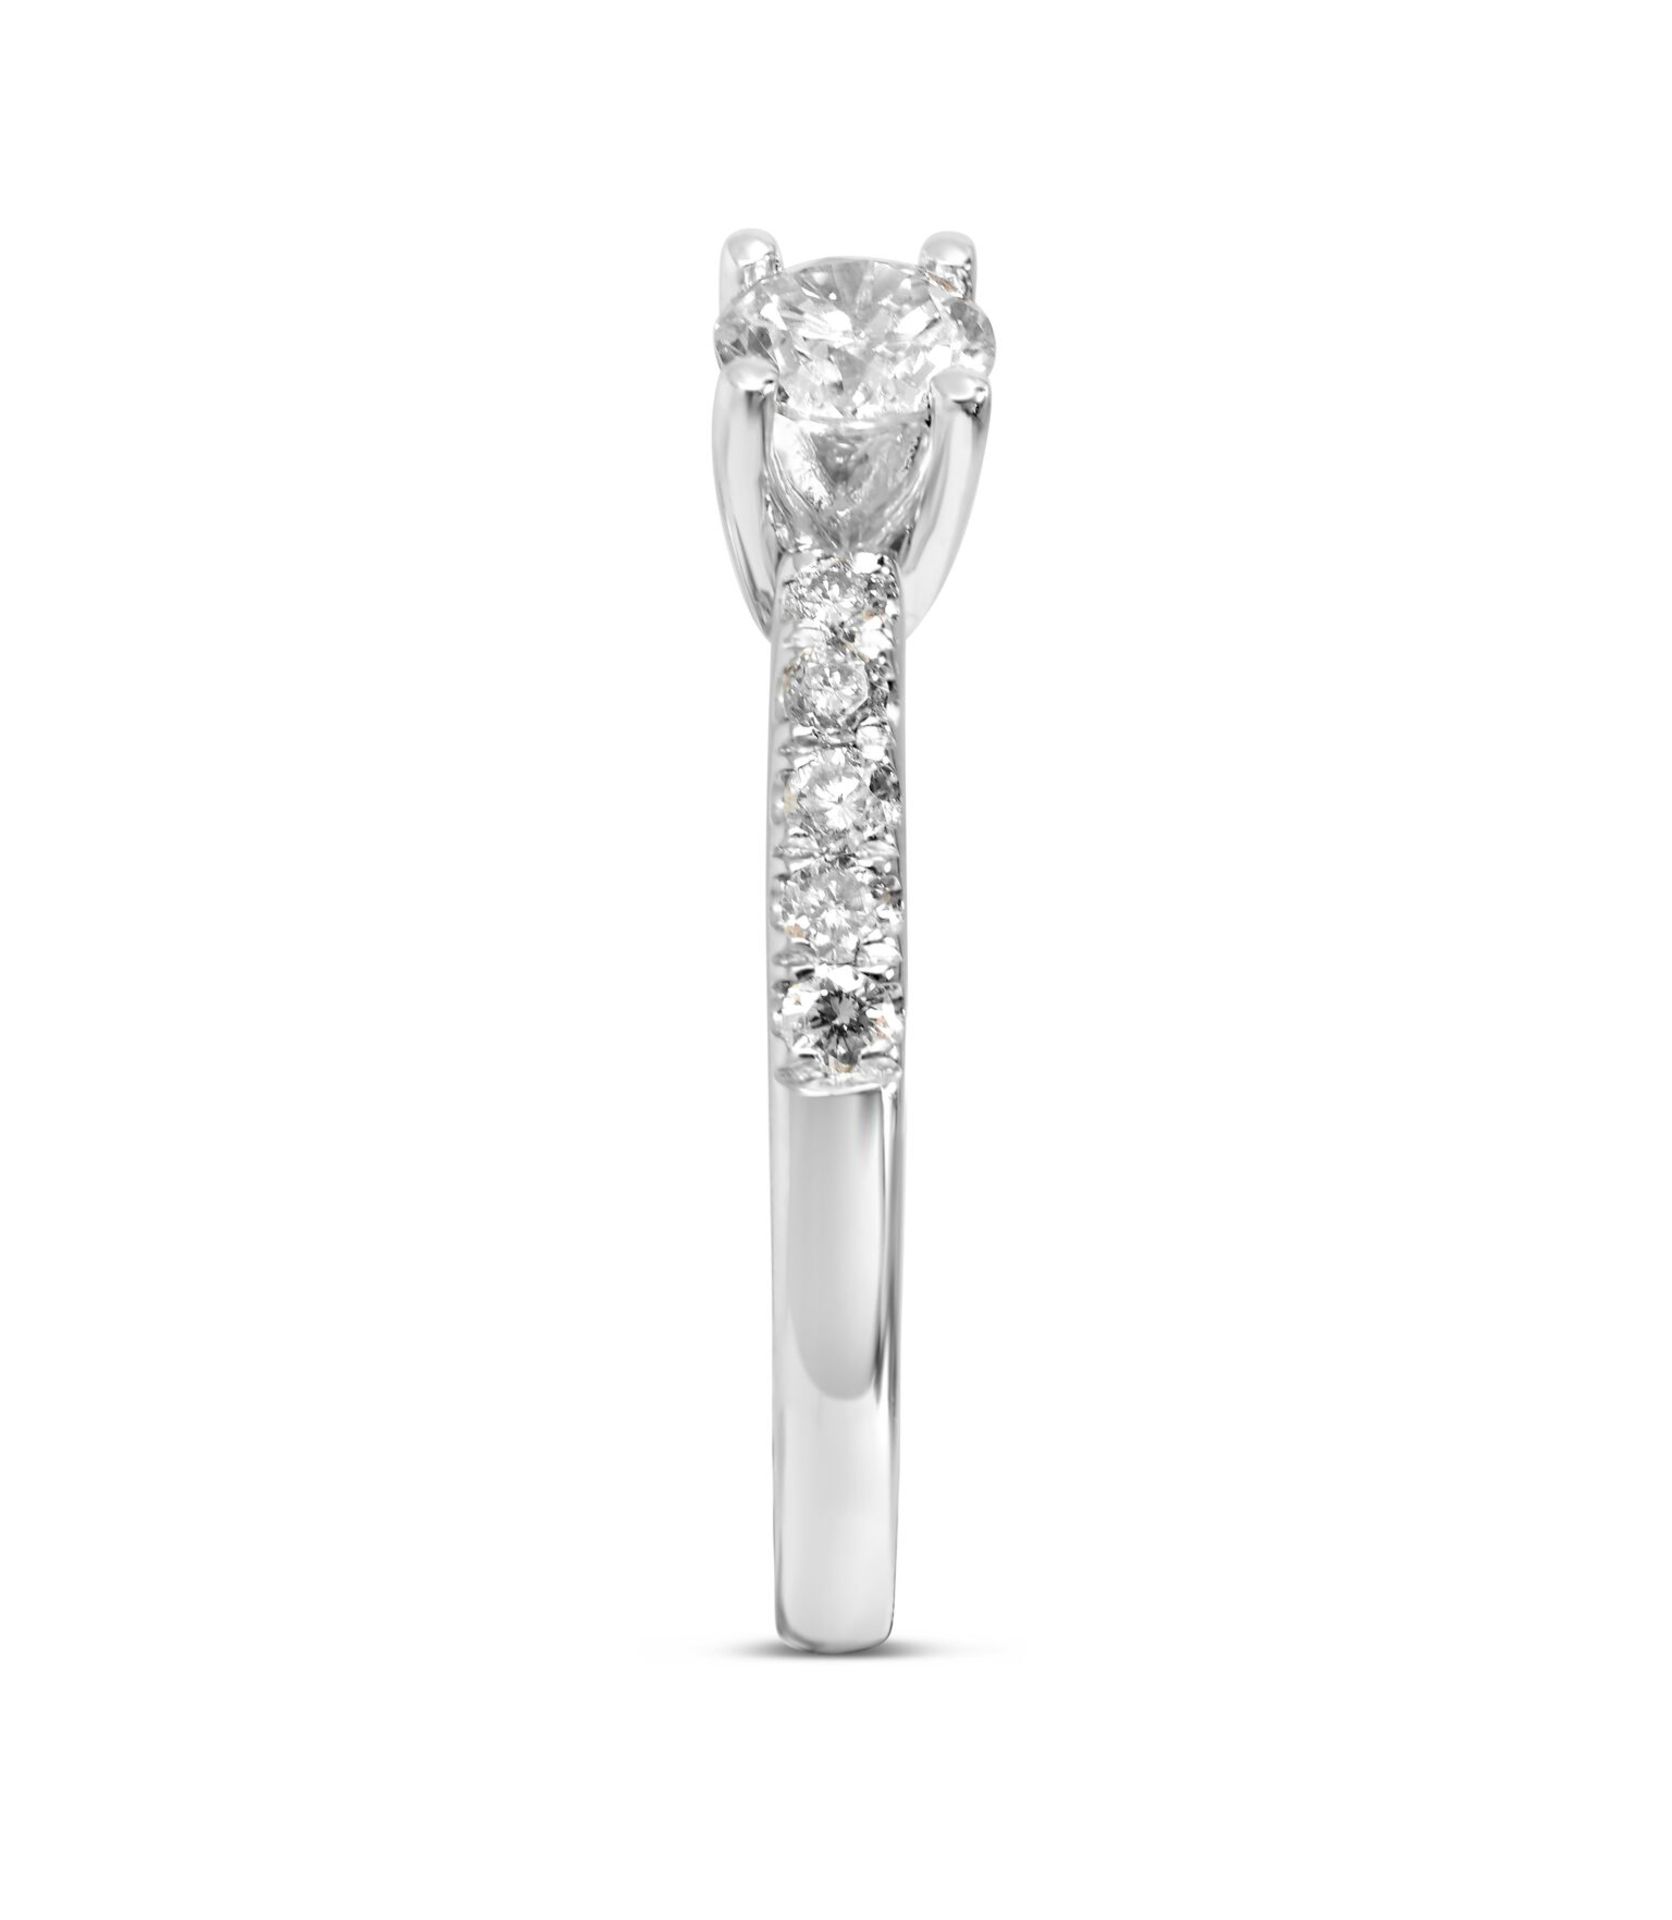 Solitaire diamond ring with diamonds on shoulder